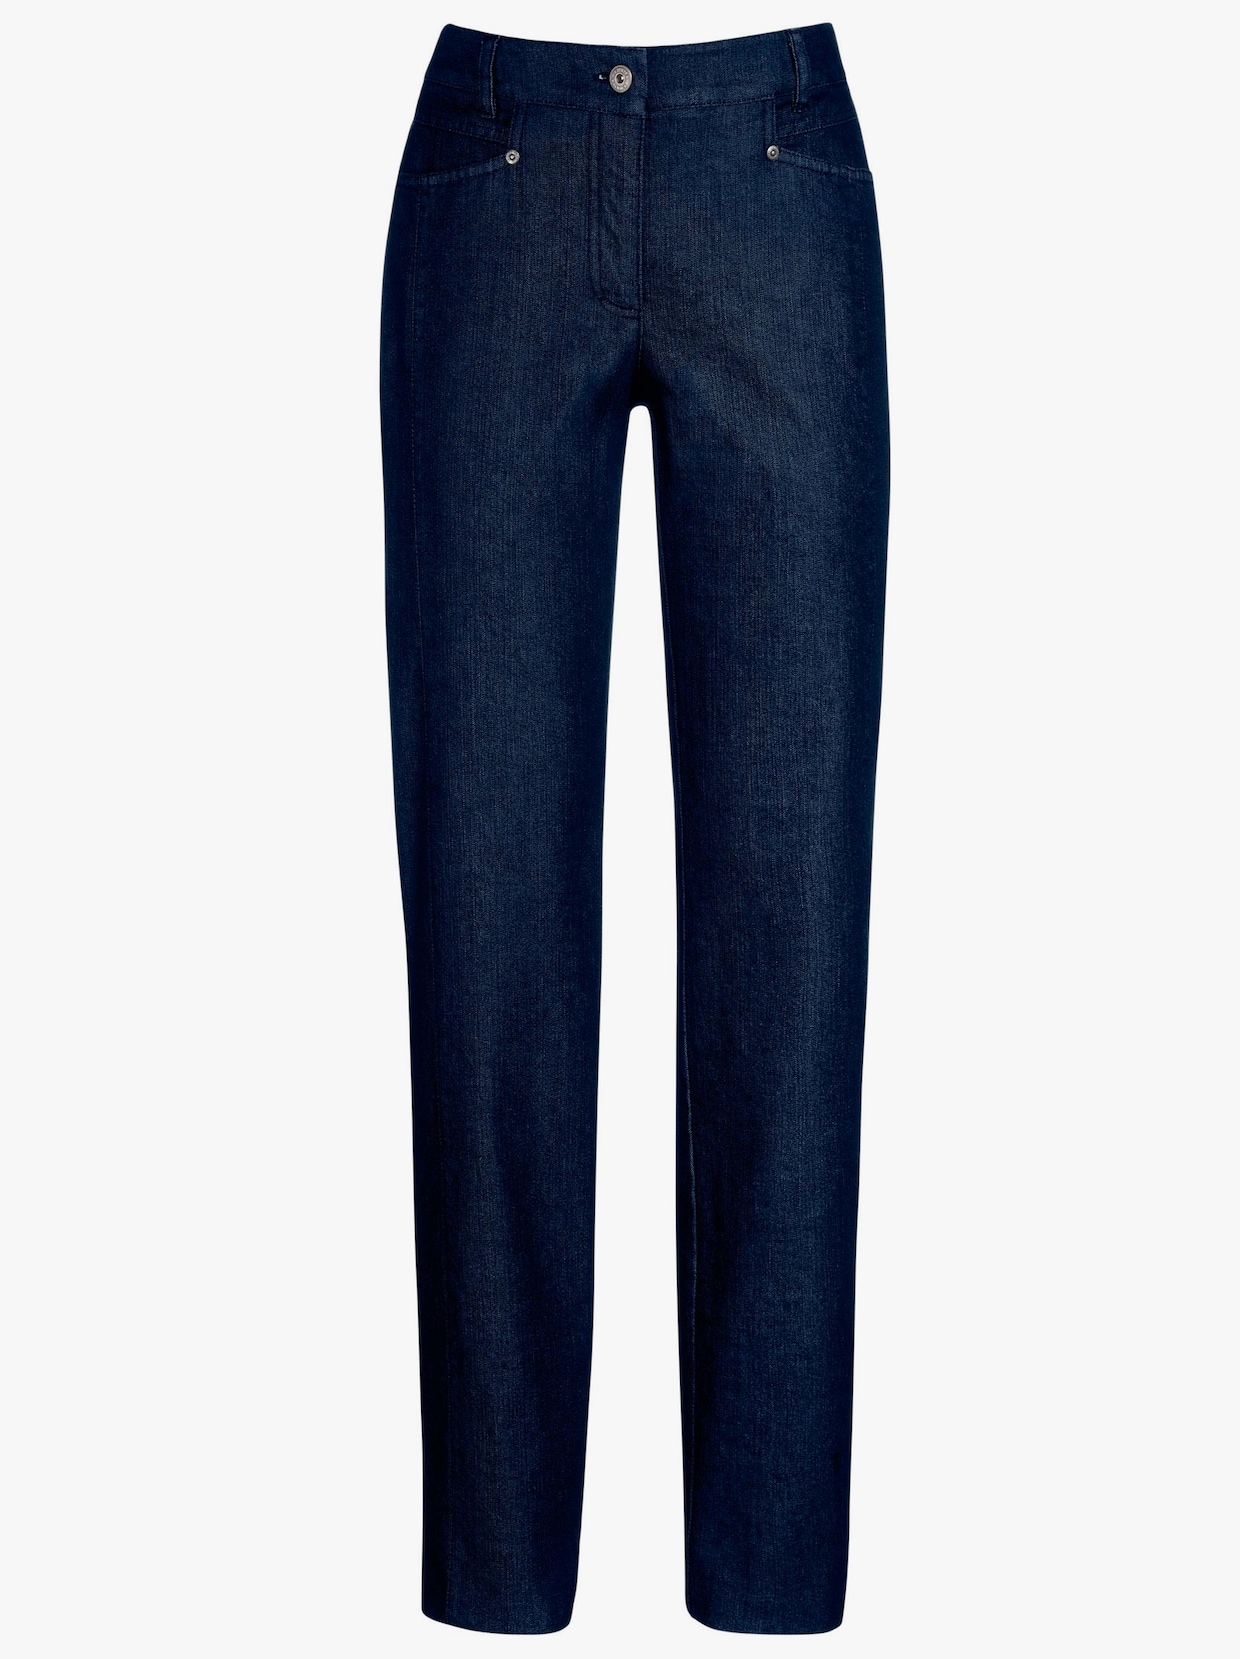 Cosma Gerade Jeans - blue-stone-washed